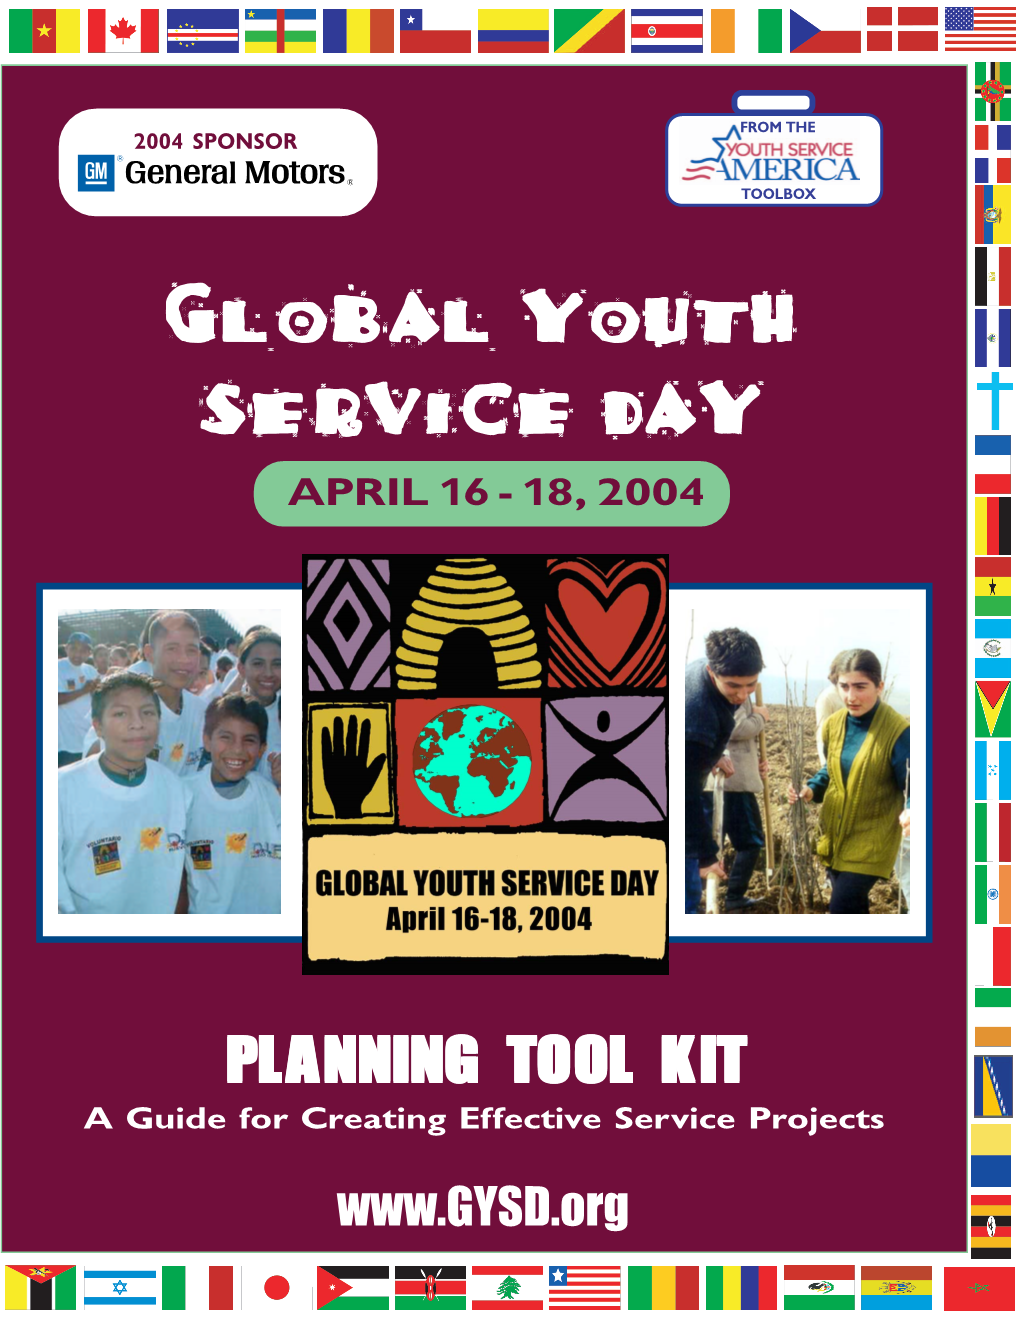 What Is Global Youth Service Day?